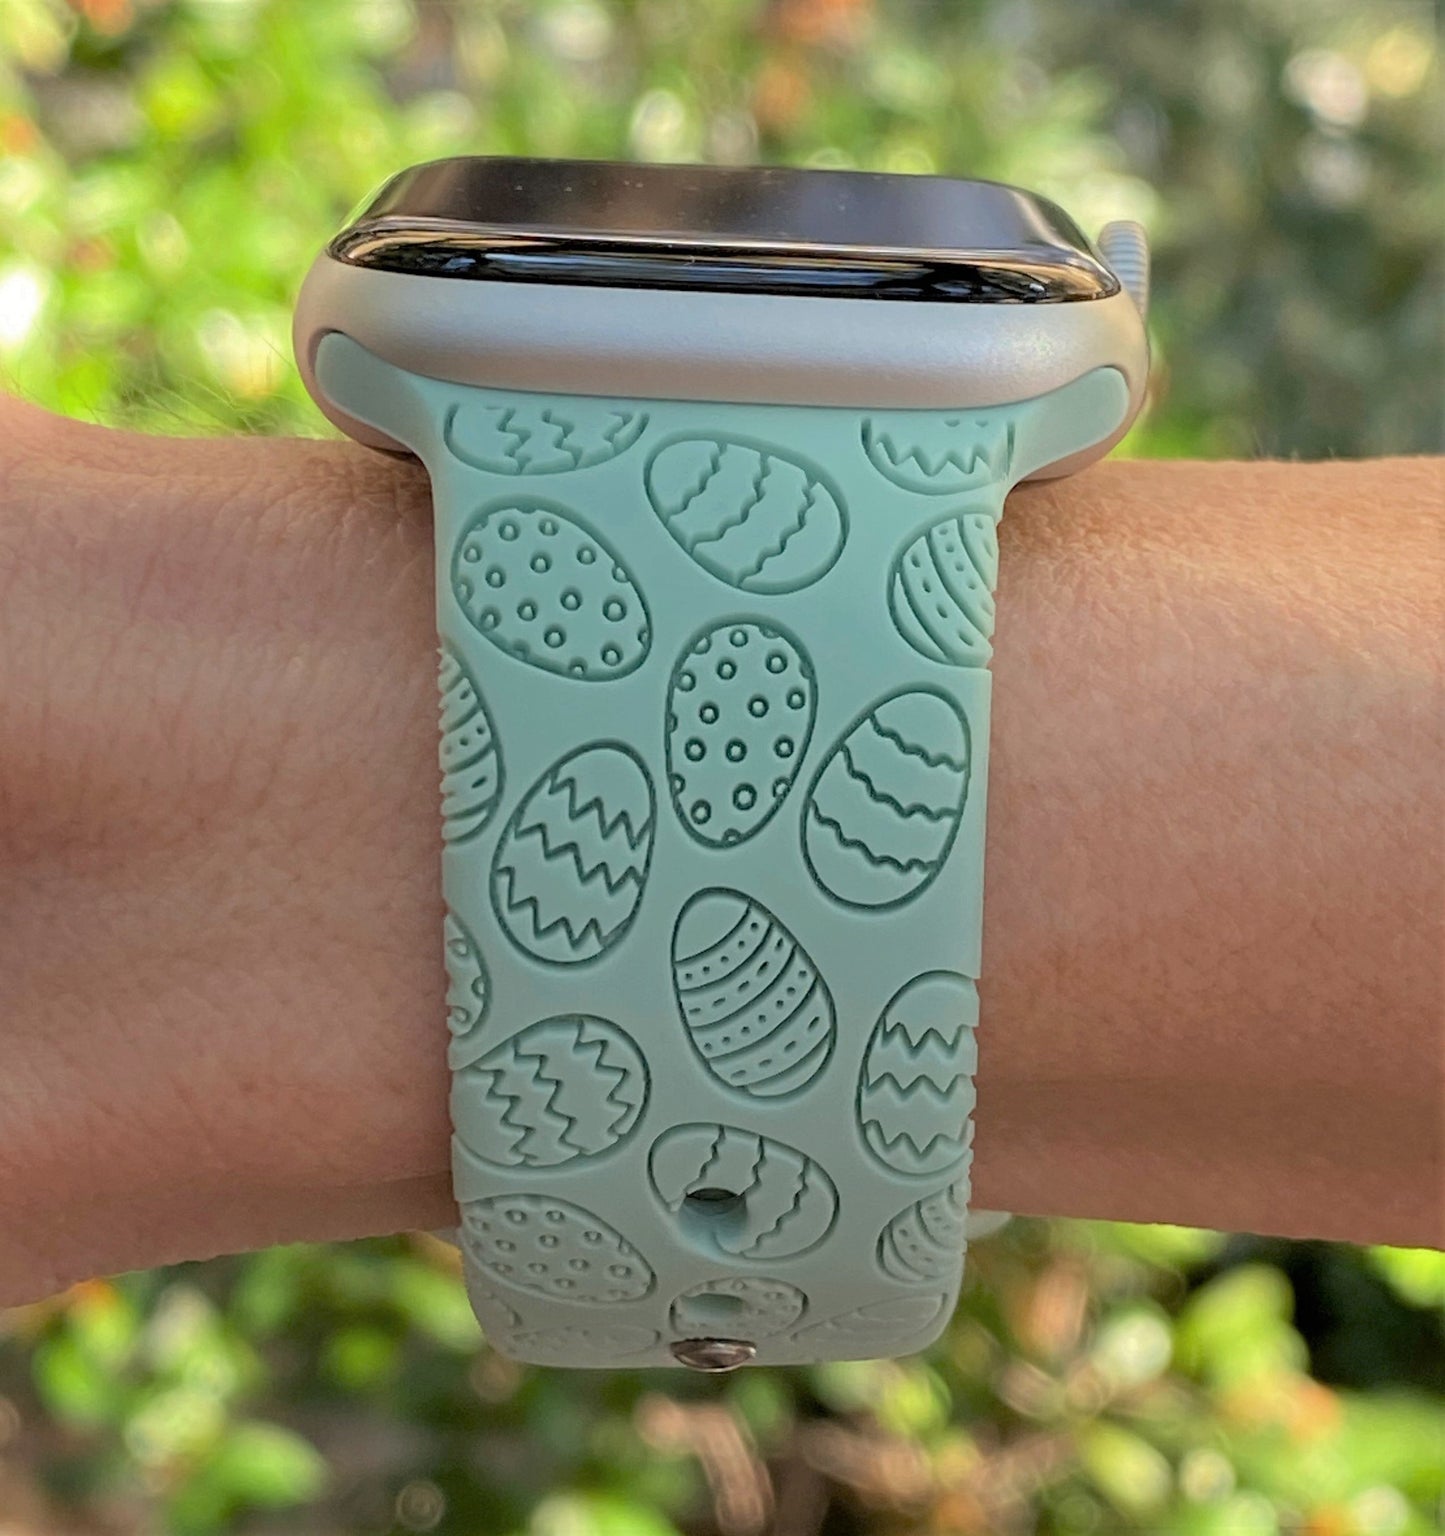 Easter Egg Apple Watch Band